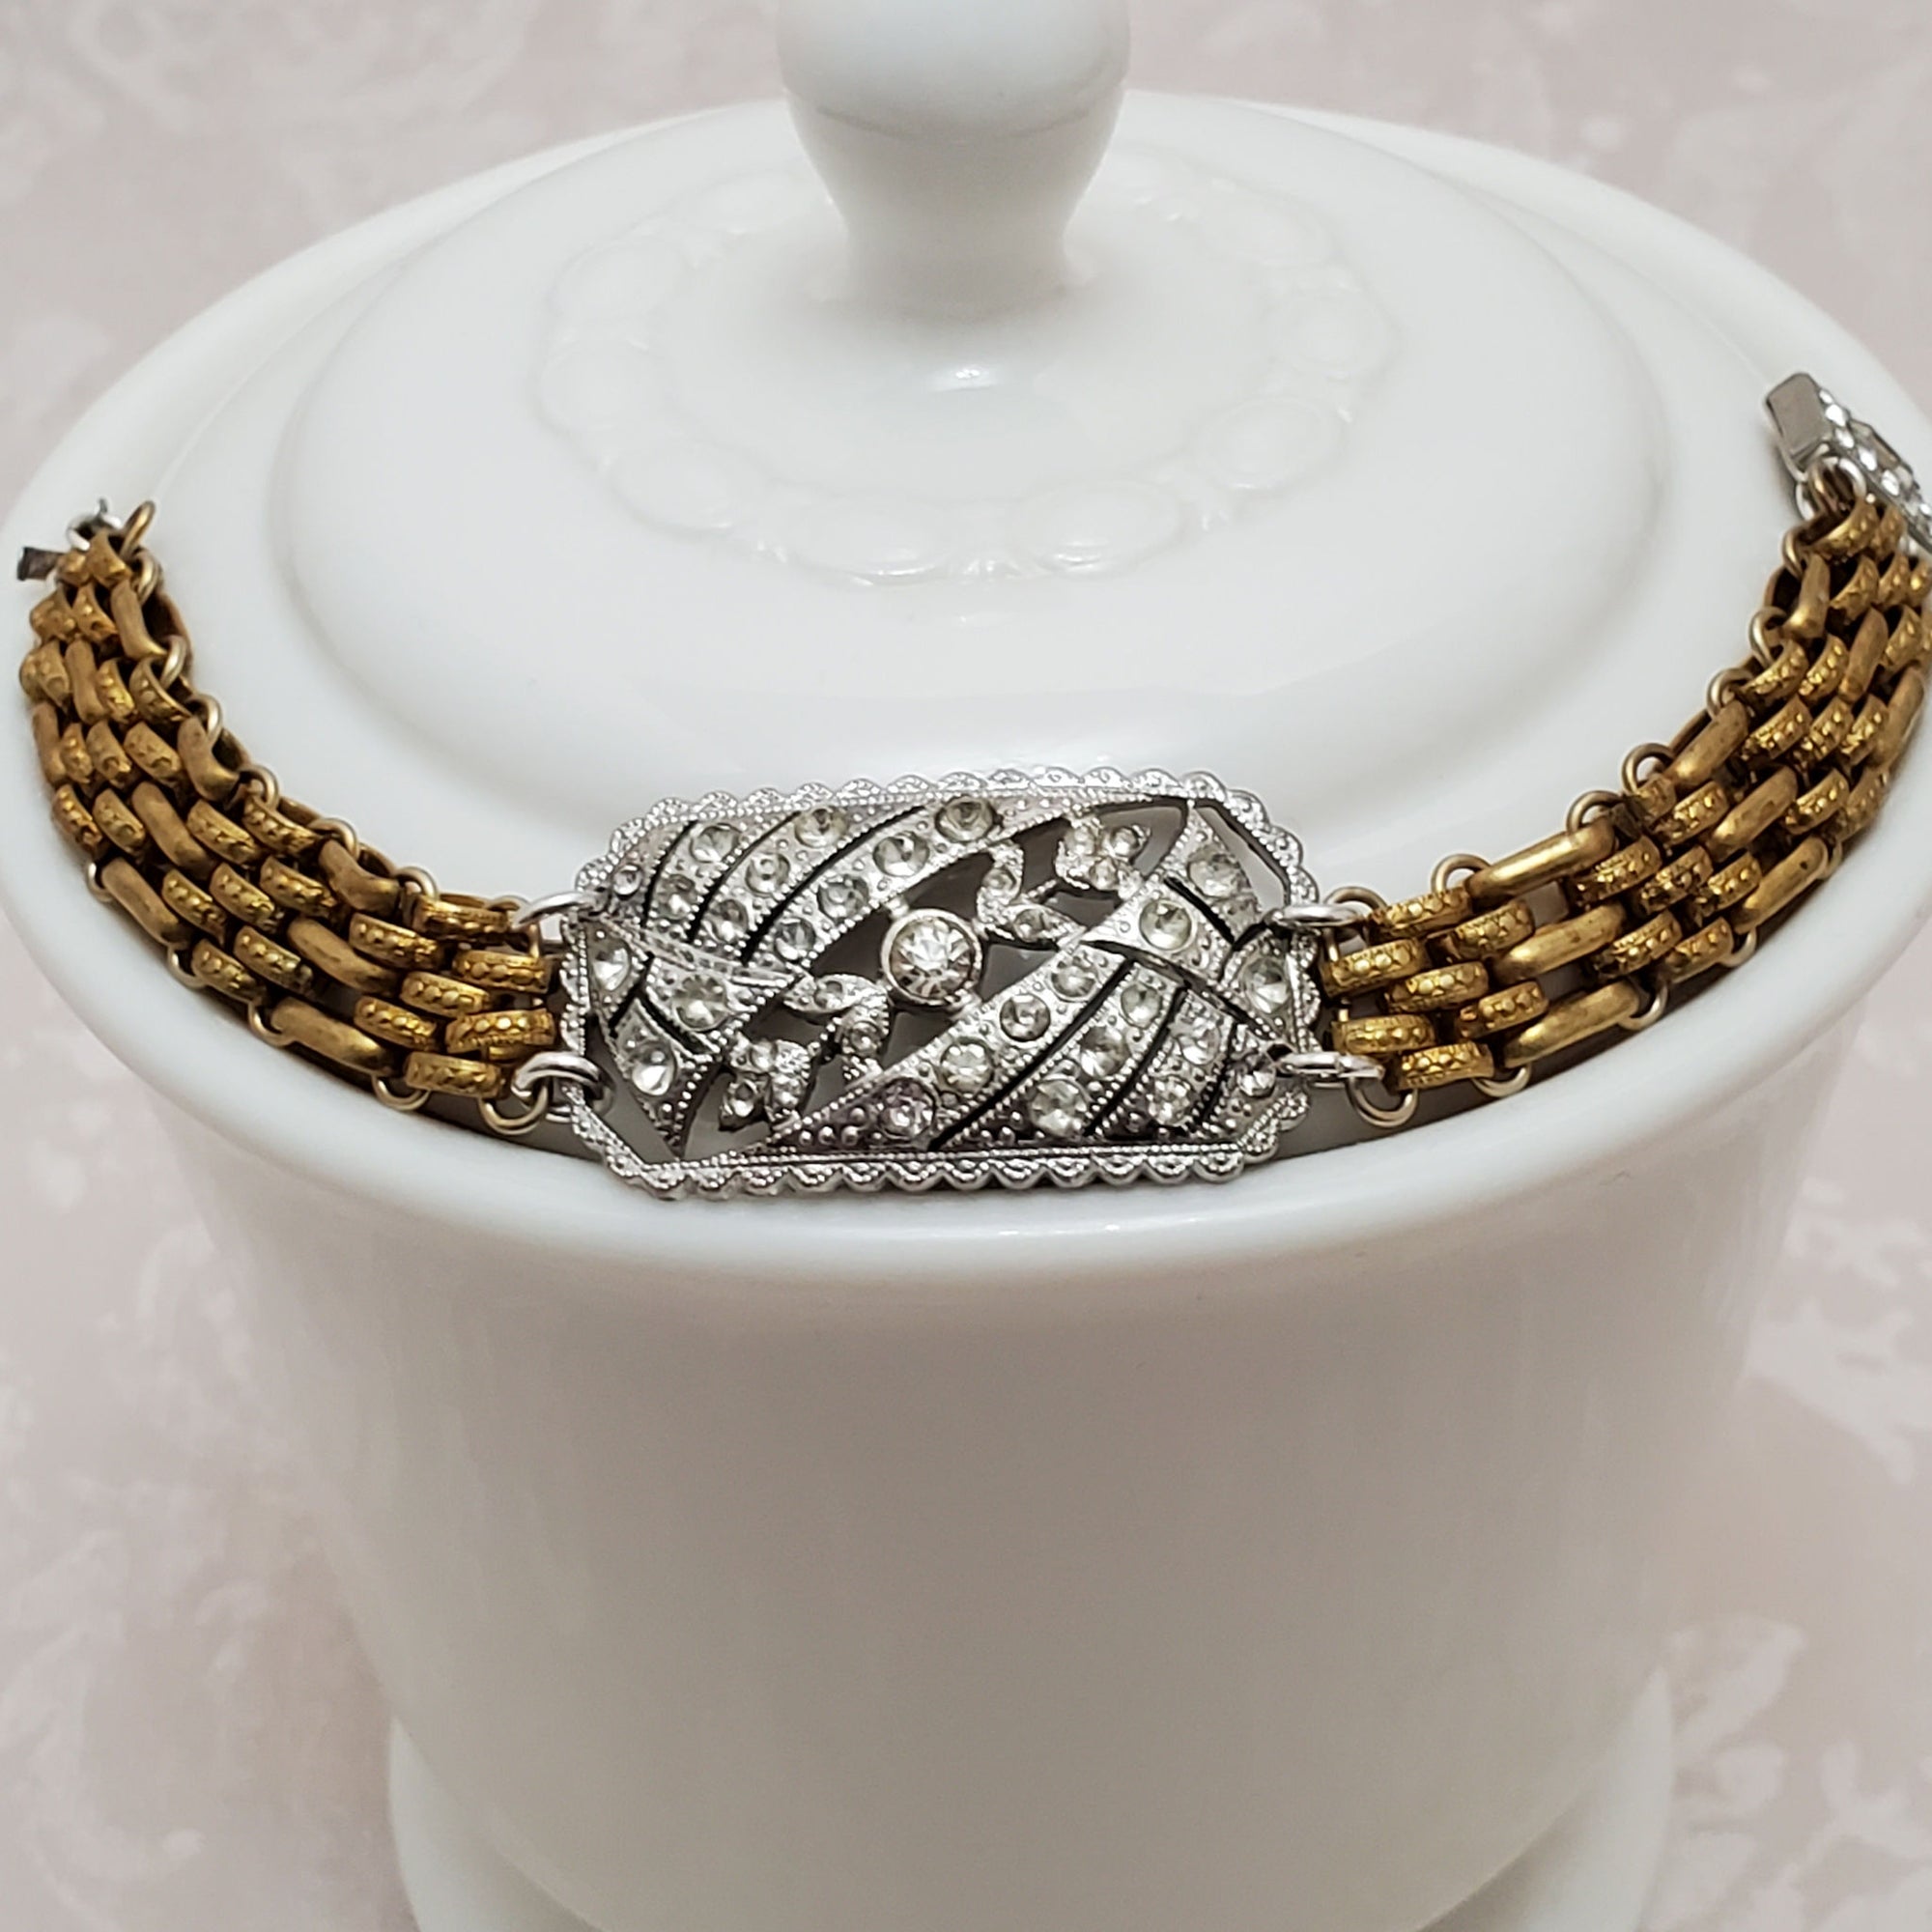 Vintage Gold Tone Patterned Watch Chain Bands